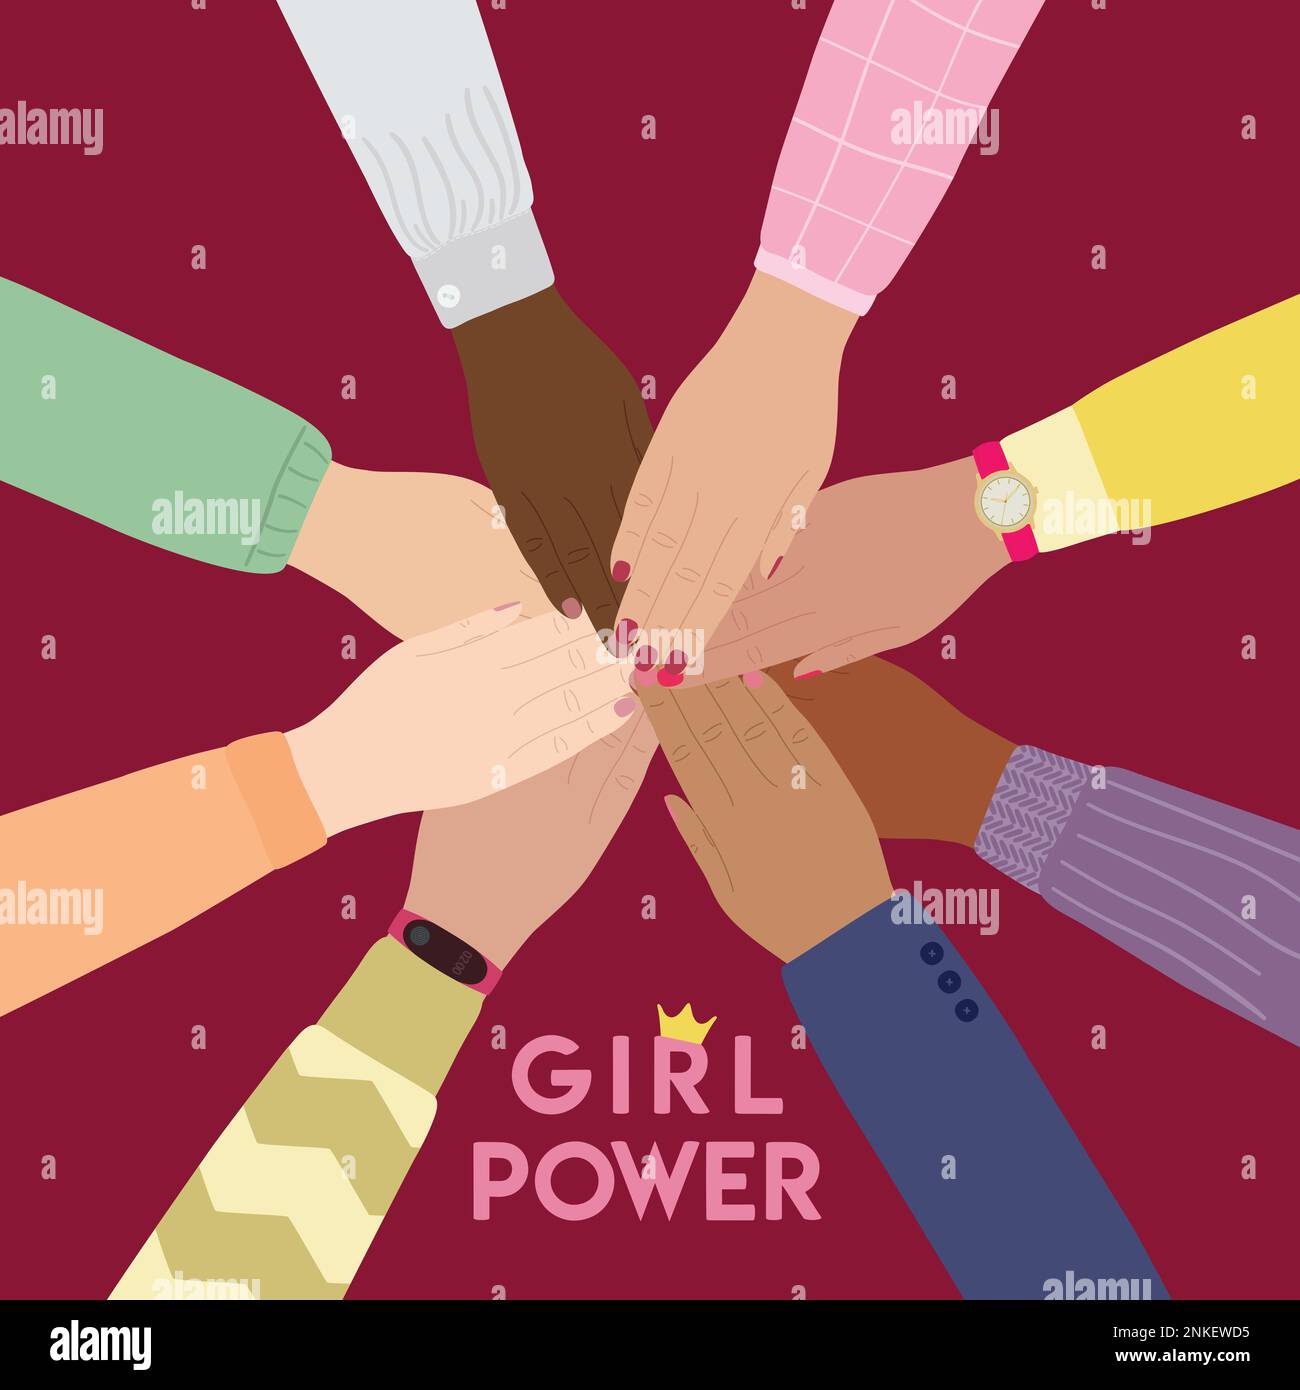 Girl power poster. Female hands stacking together. Woman empowerment, girl power, fight for gender equality, feminism and sisterhood concept. Hand dra Stock Vector